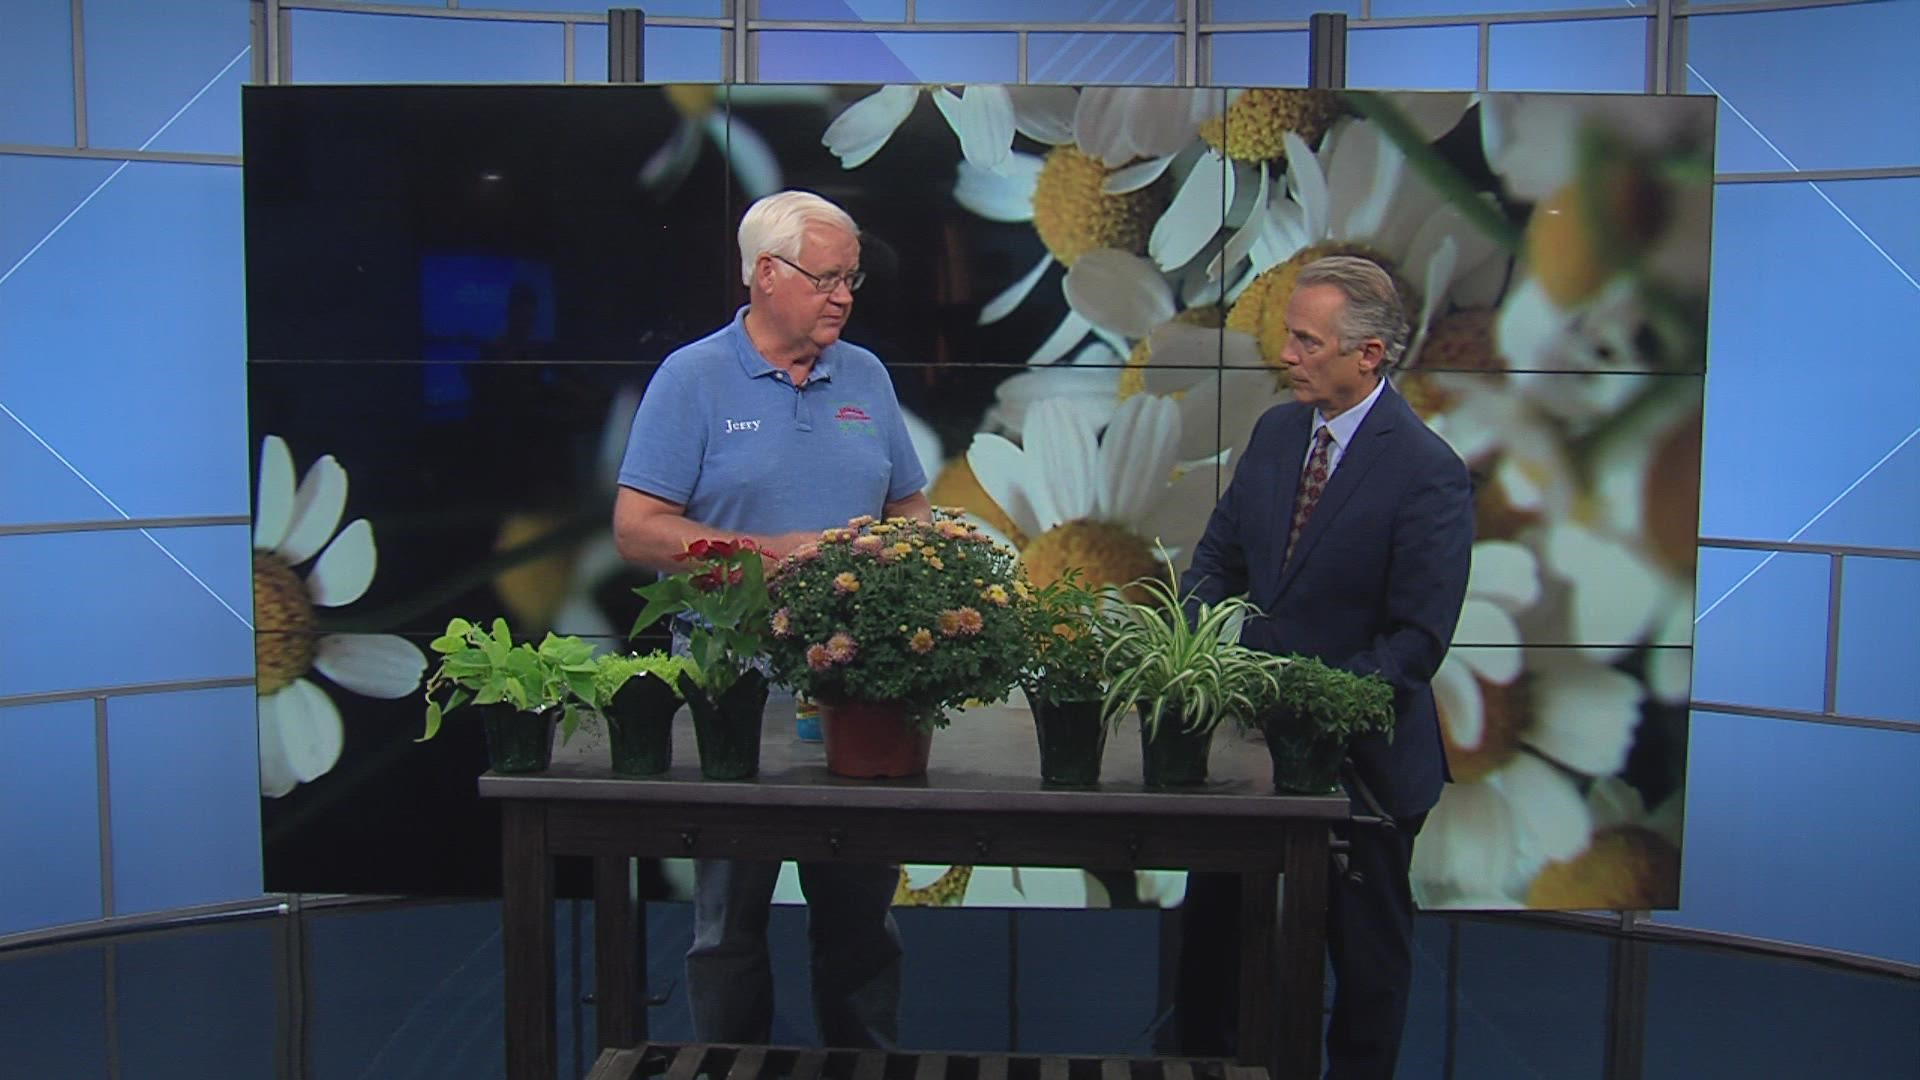 Jerry Holub, general manager of Holub Greenhouses, helps you prepare your yard for fall.